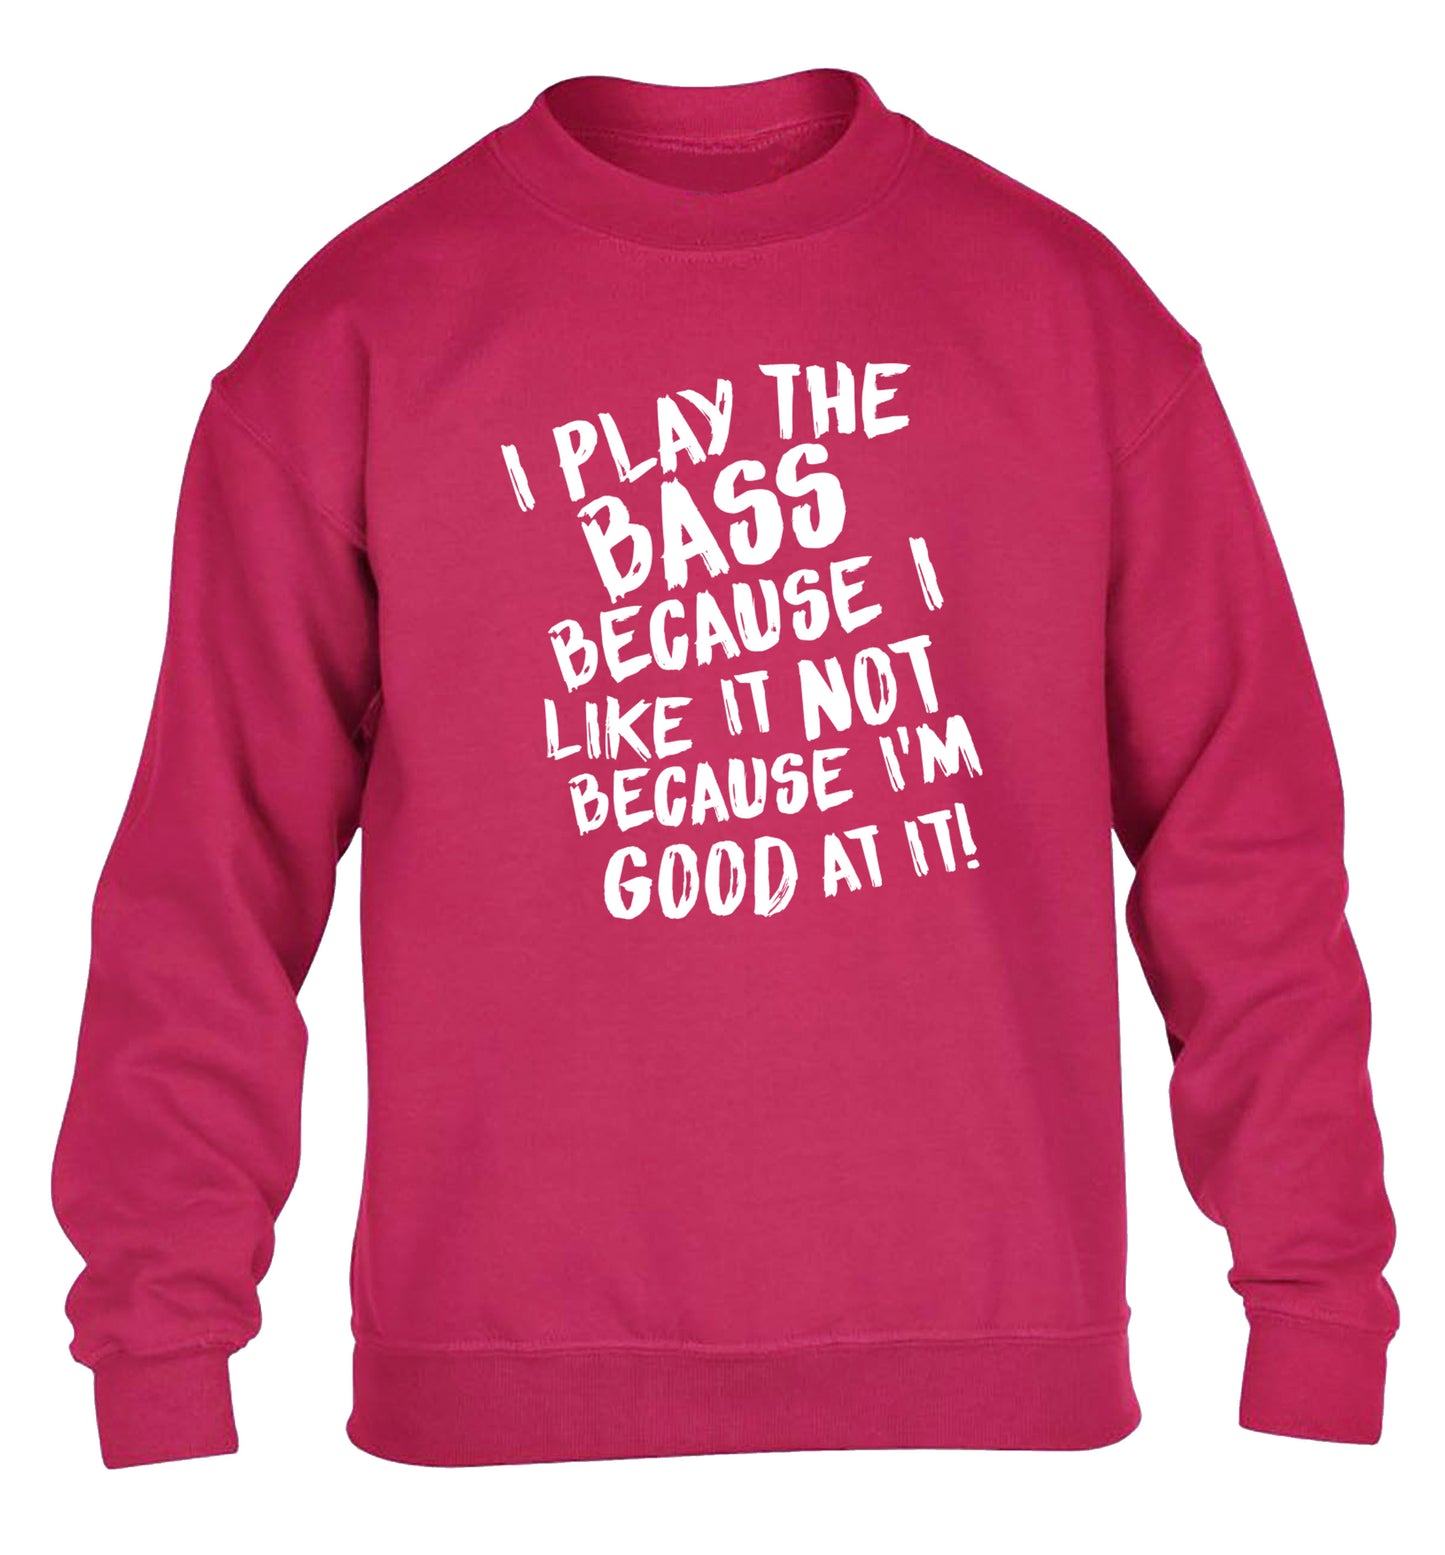 I play the bass because I like it not because I'm good at it children's pink sweater 12-14 Years